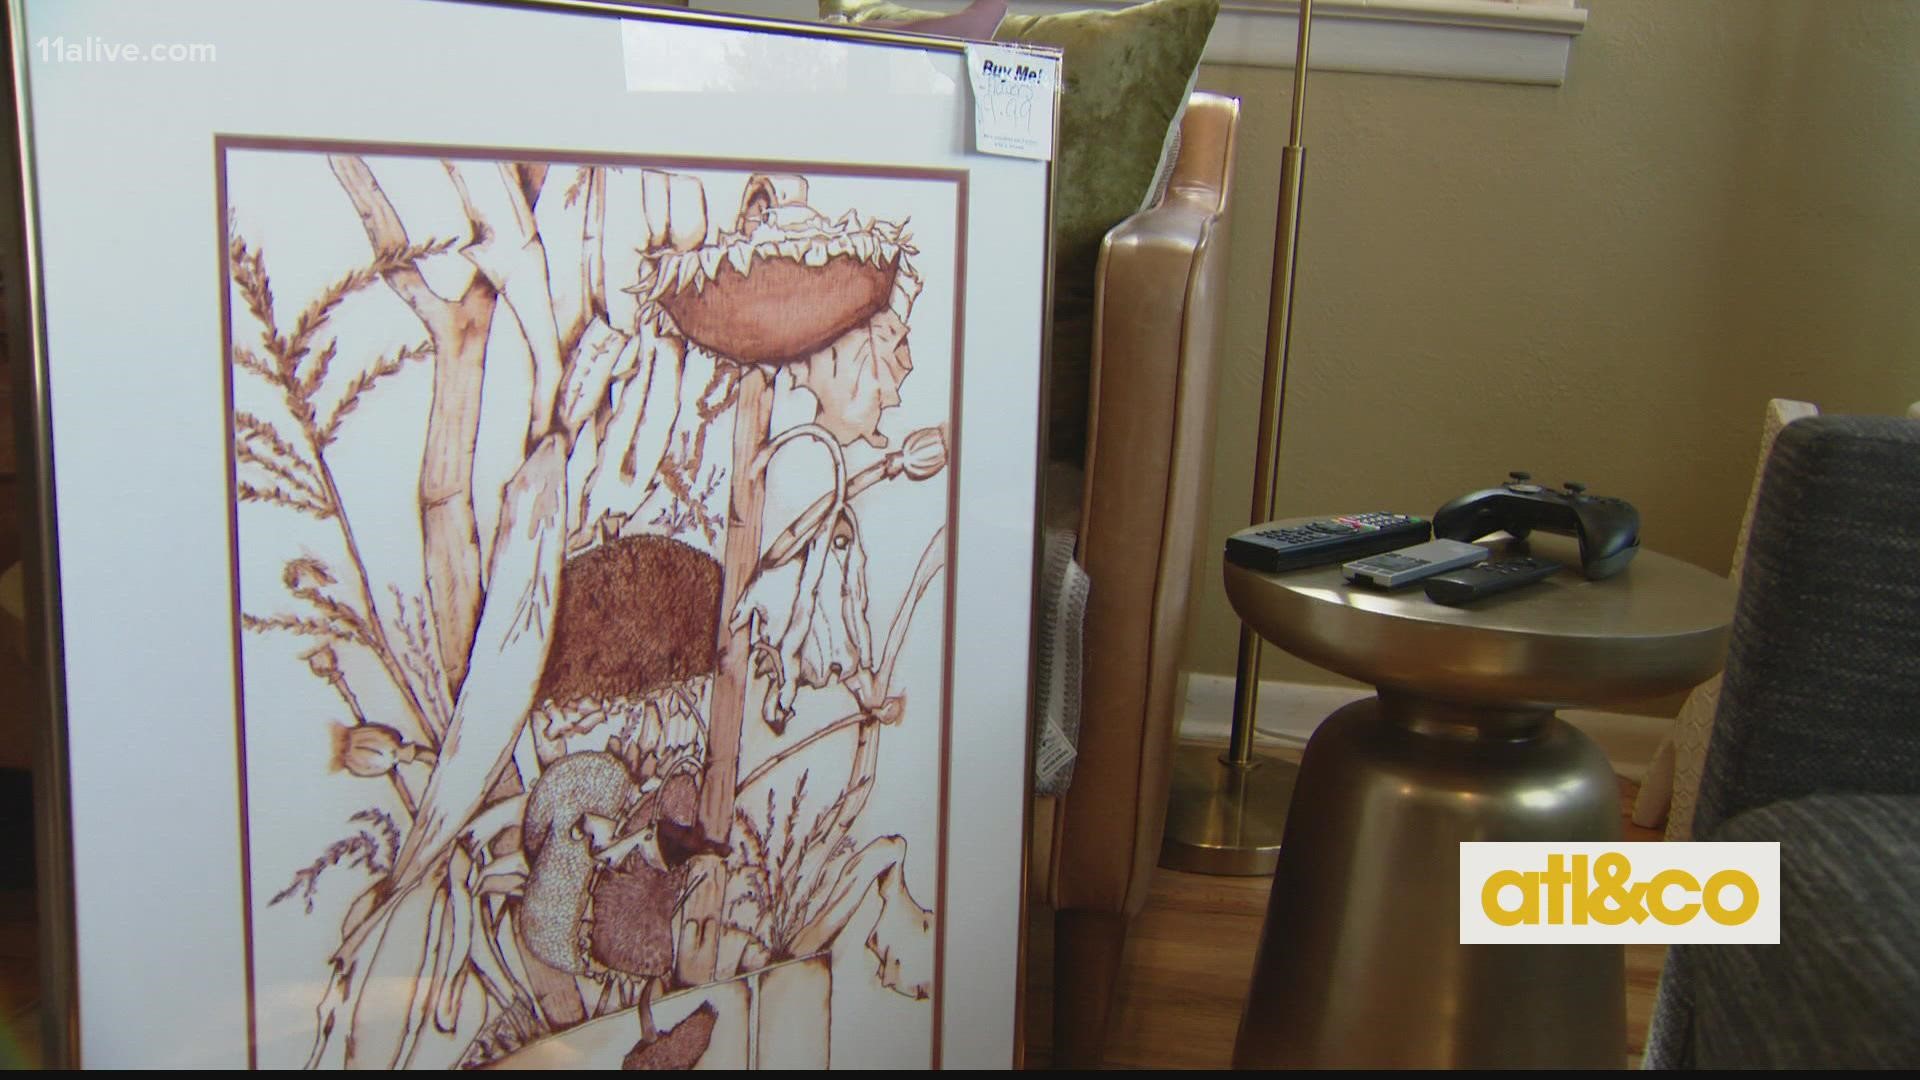 Jacob Hansen was at a Goodwill when he spotted a painting he sold to a stranger when he was 14